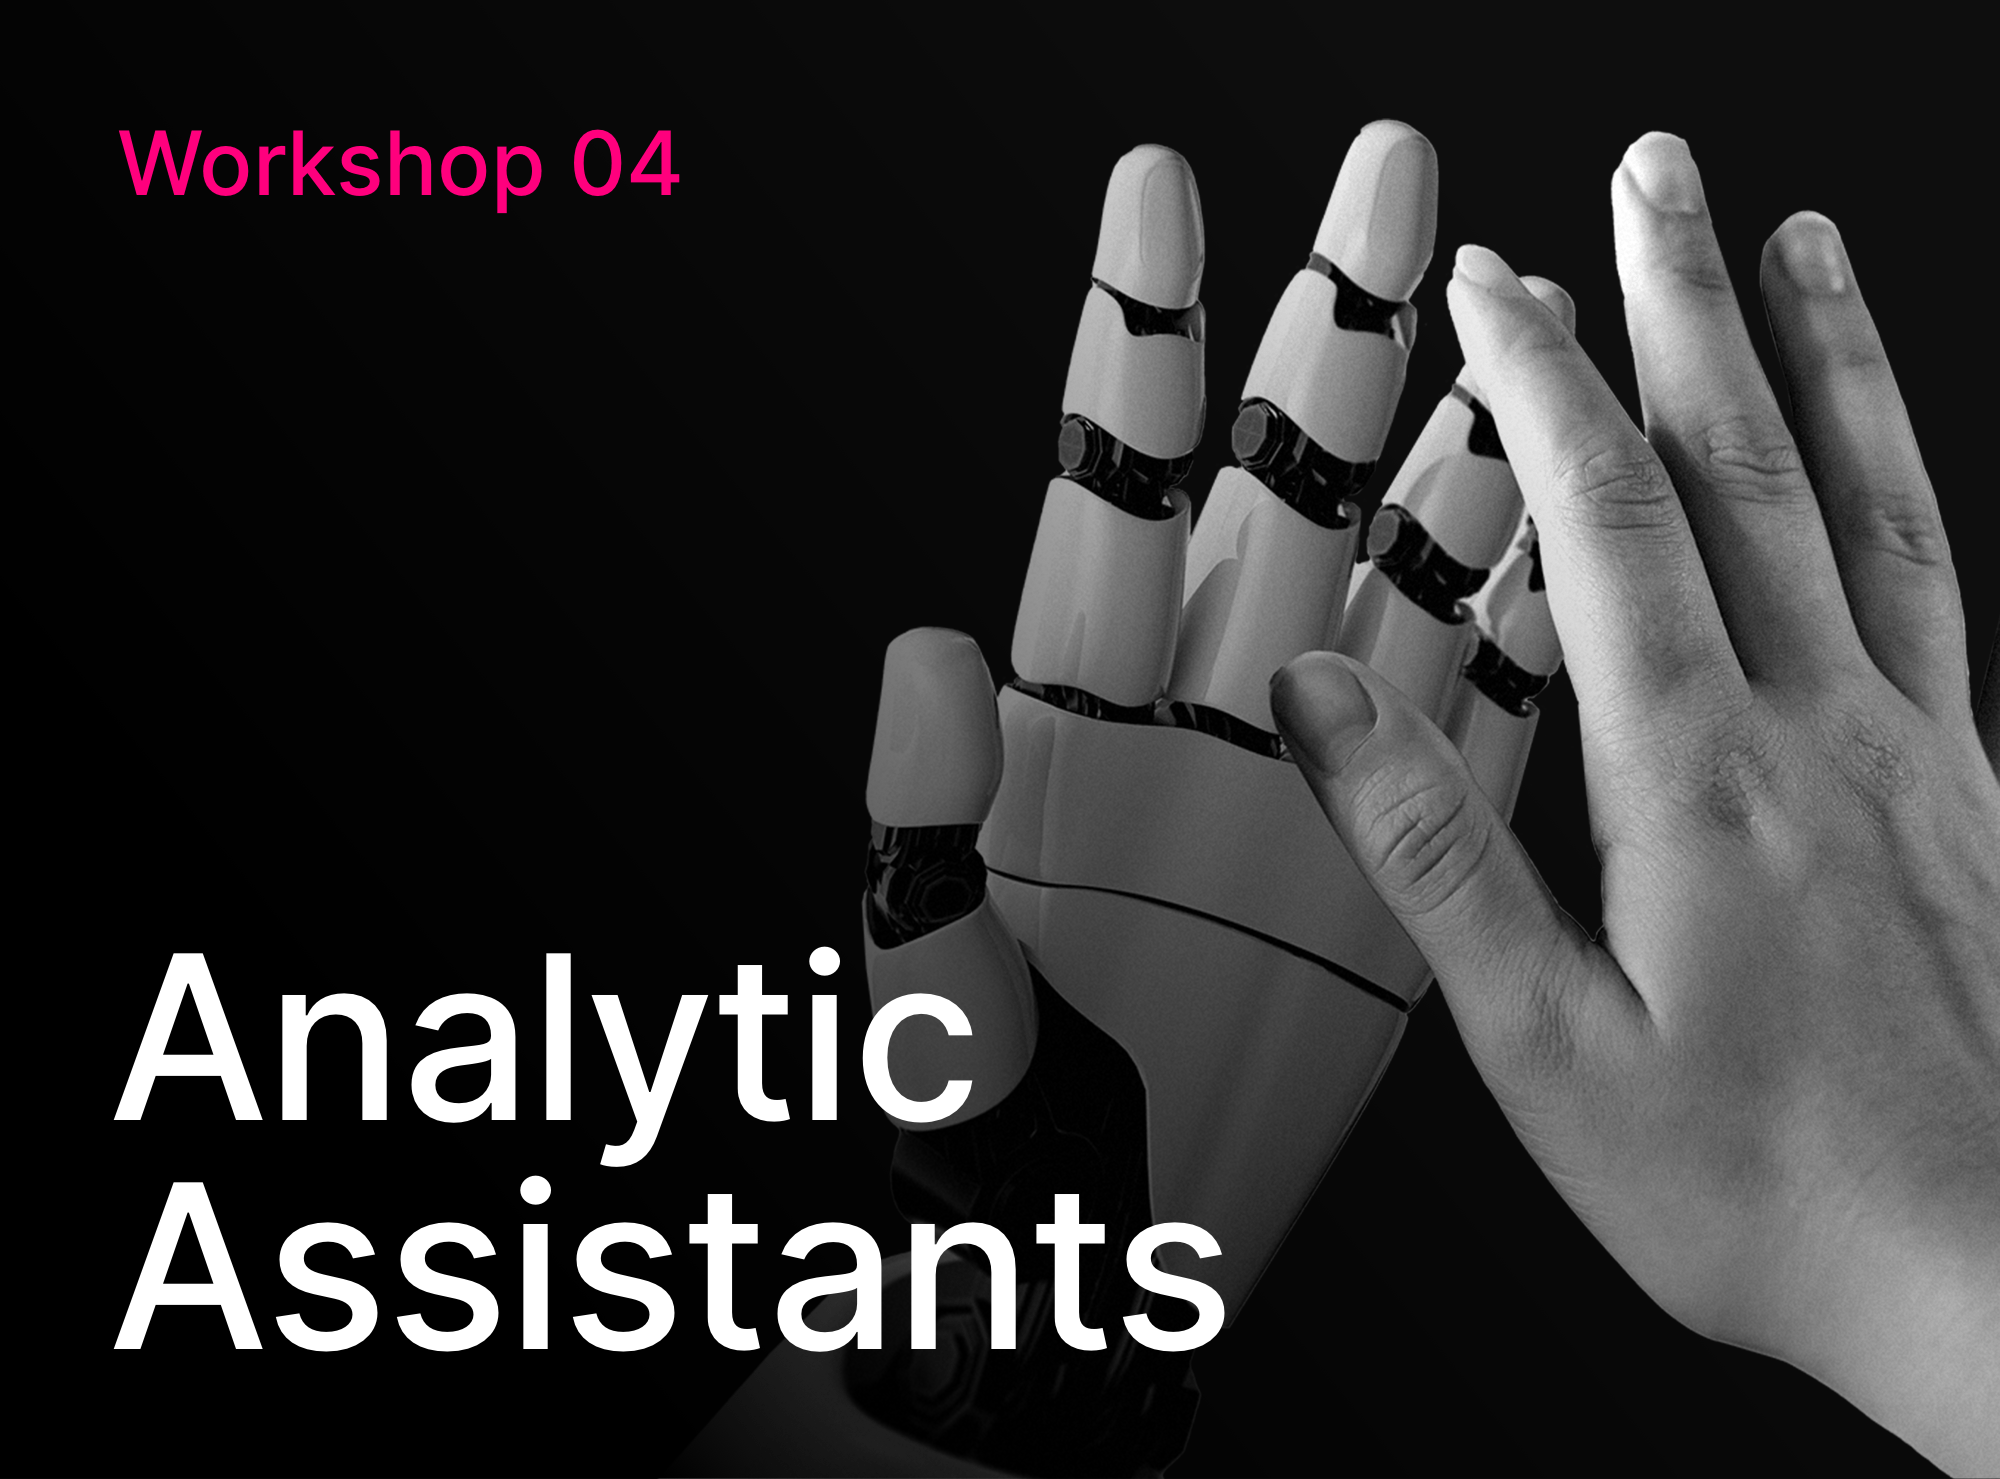 Workshop 03 - Analytic Assistant